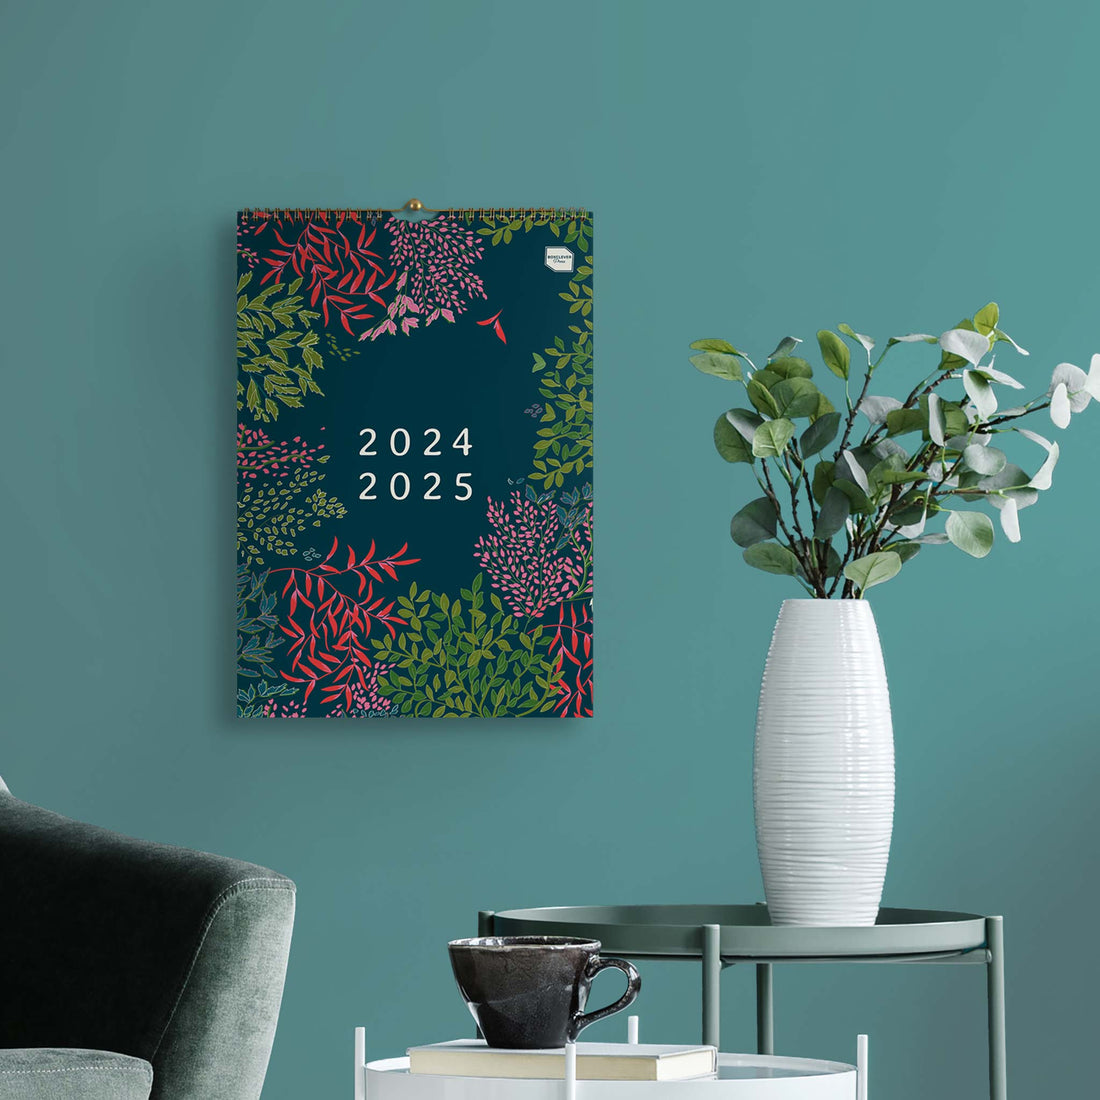 Large wall calendar hanging on a blue wall with a vase of flowers in front